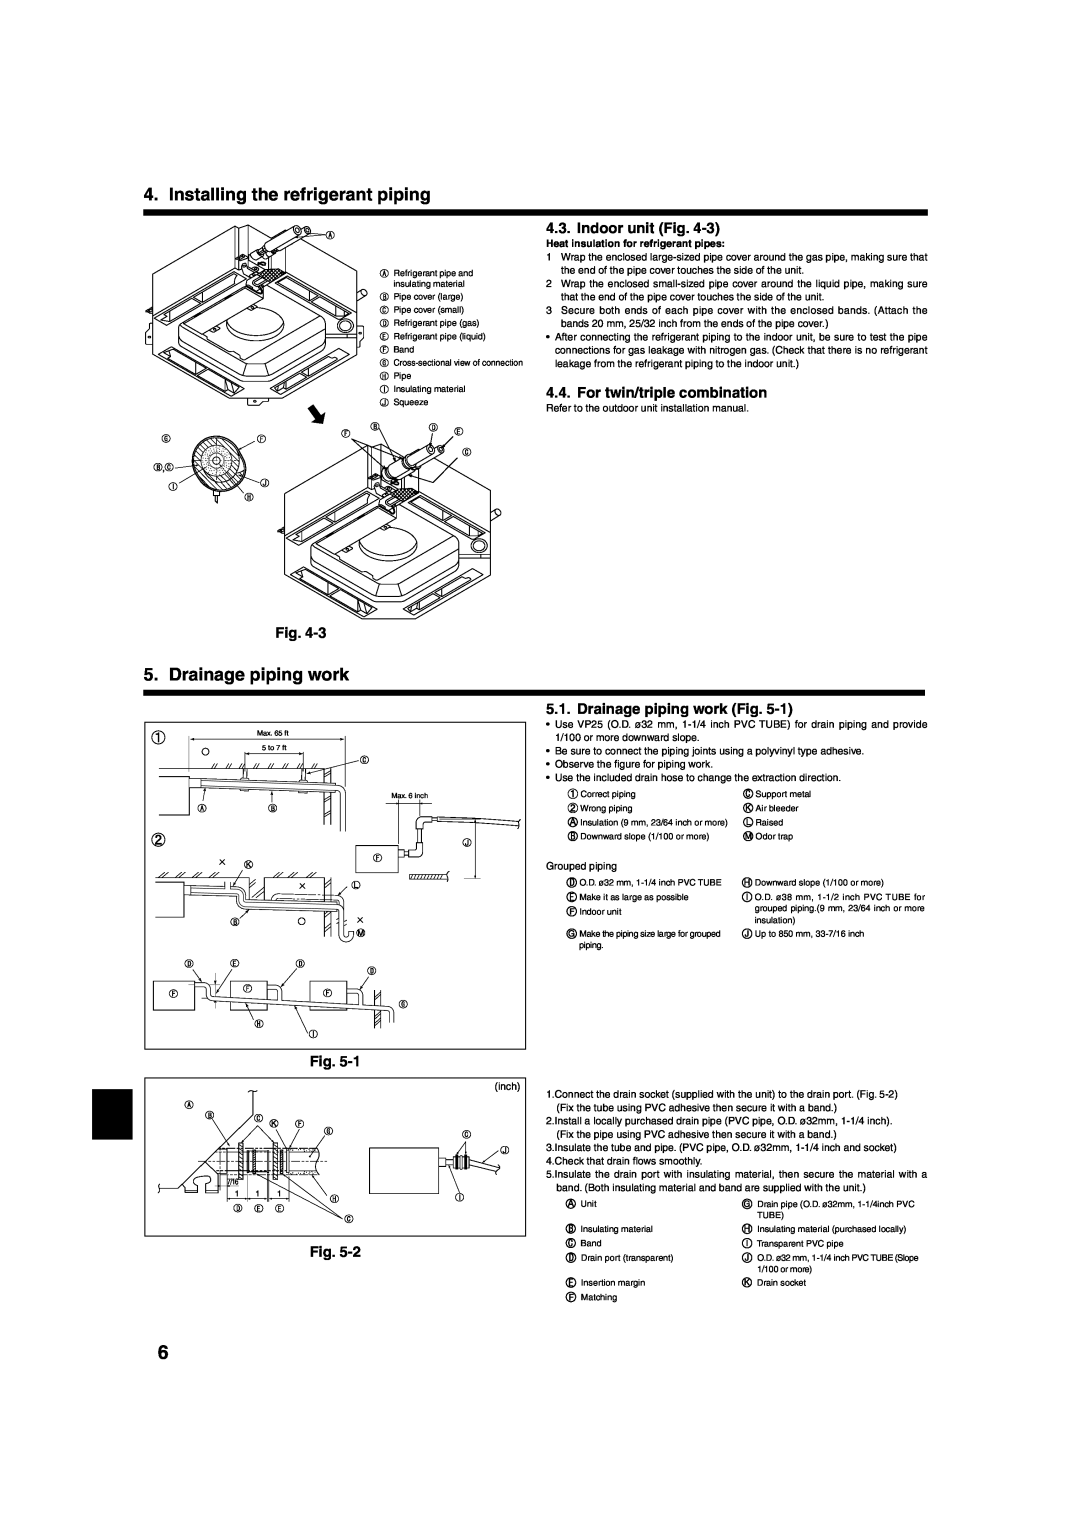 Mitsumi electronic PLA-ABA installation manual Indoor unit Fig, For twin/triple combination, Drainage piping work Fig 